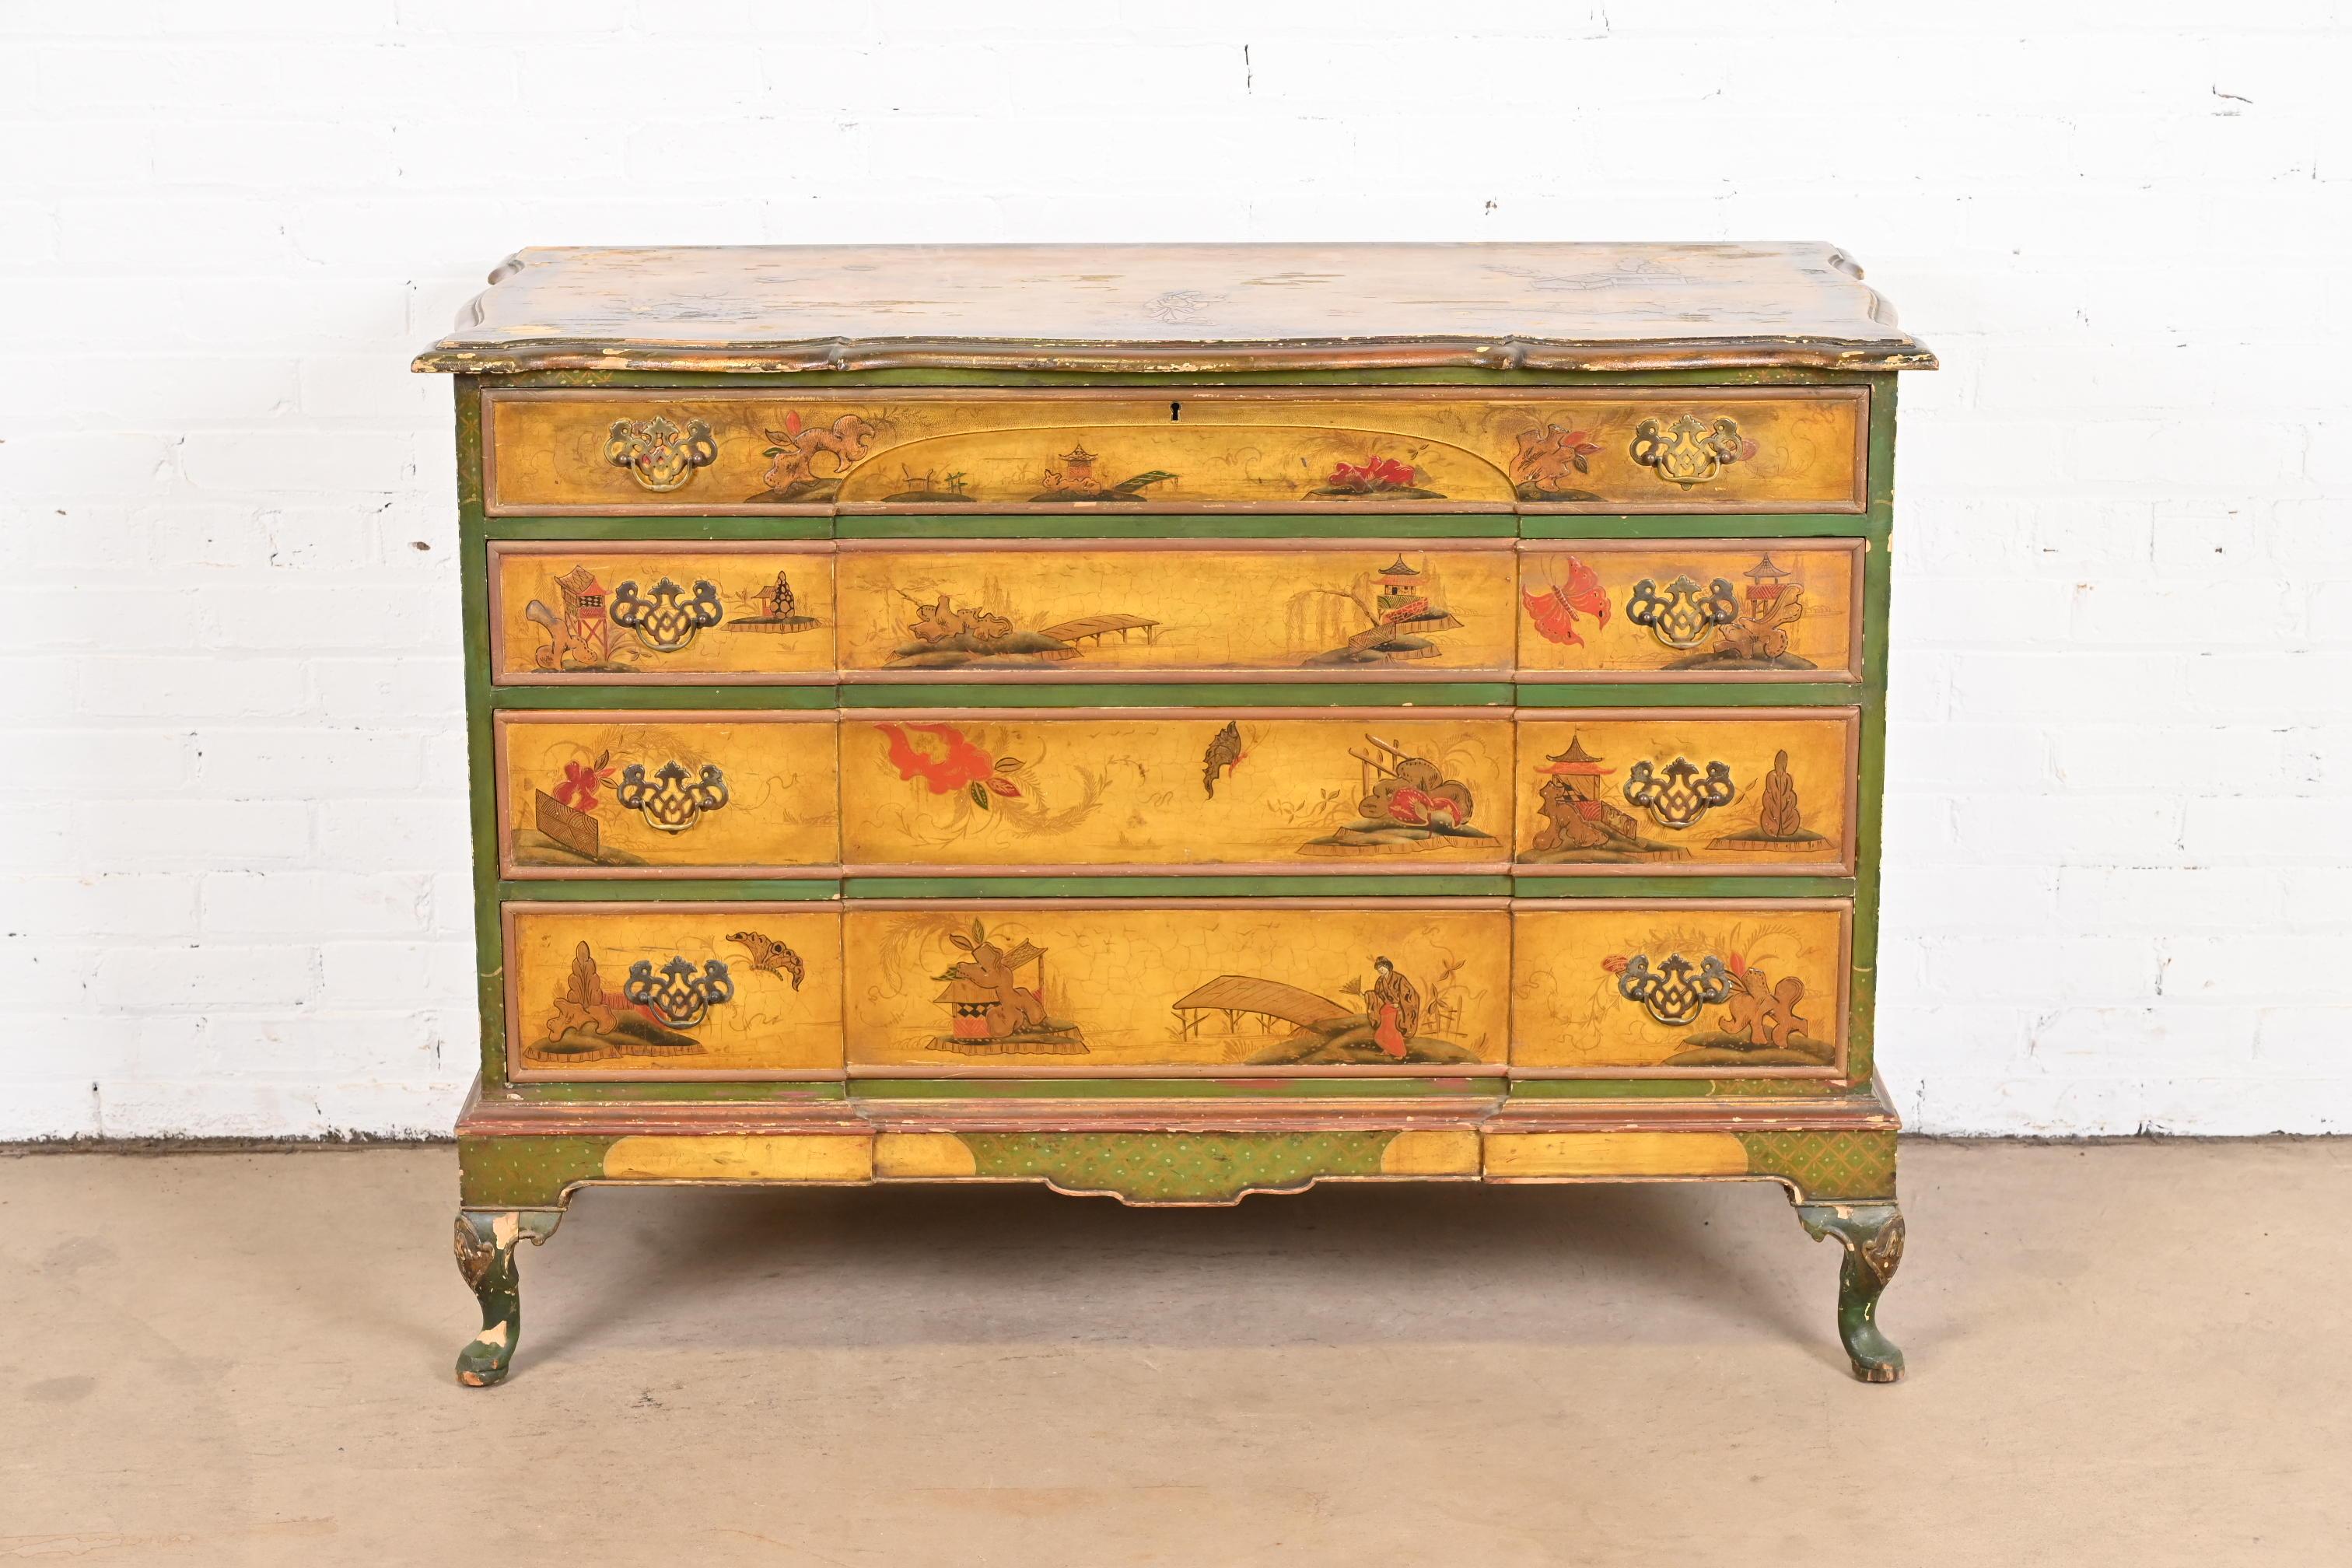 Antique Japanned Chinoiserie Queen Anne Bureau From Historic Edgecroft Mansion In Fair Condition For Sale In South Bend, IN